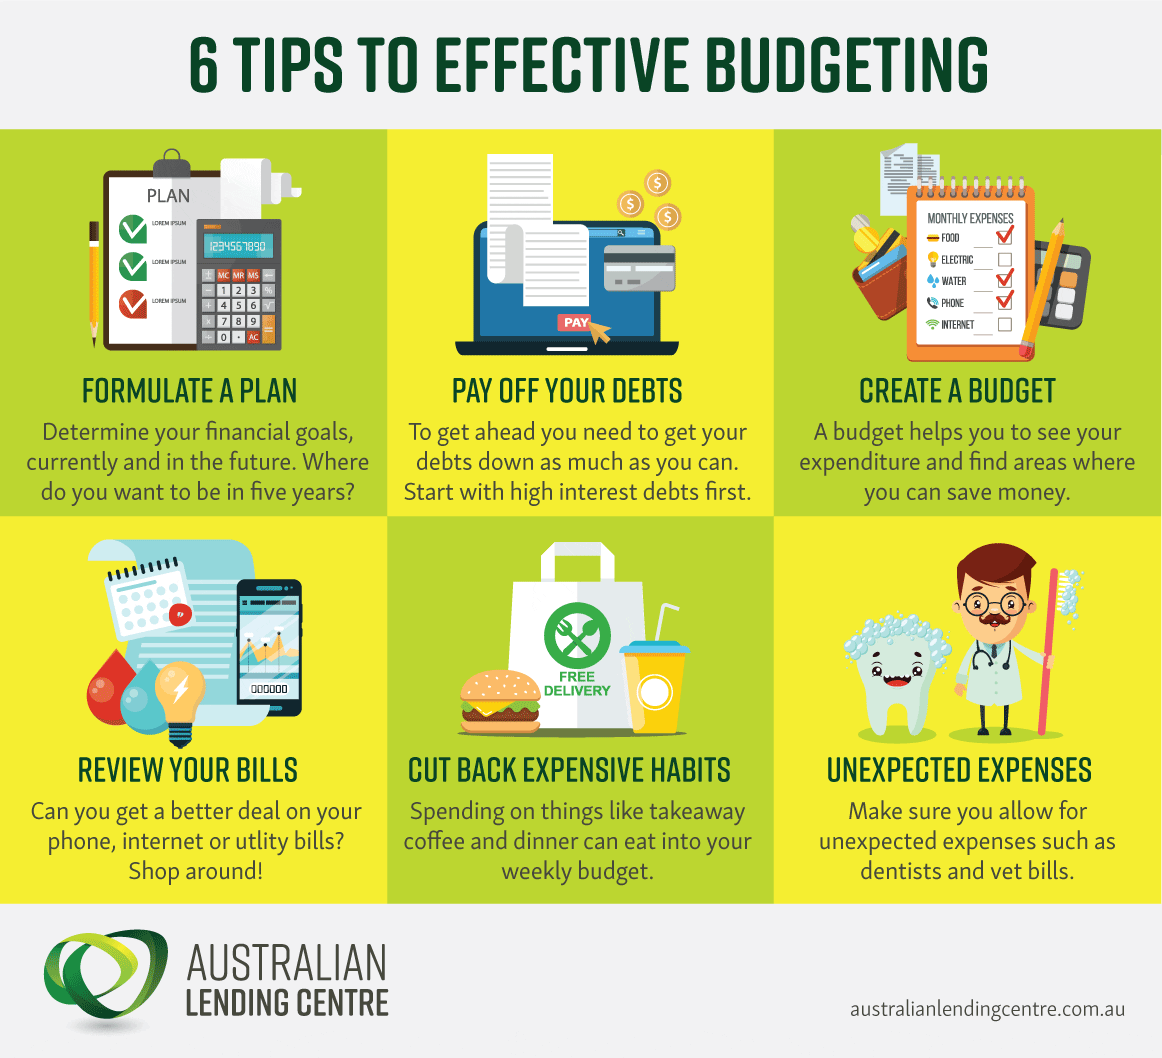 6 tips to effective budgeting